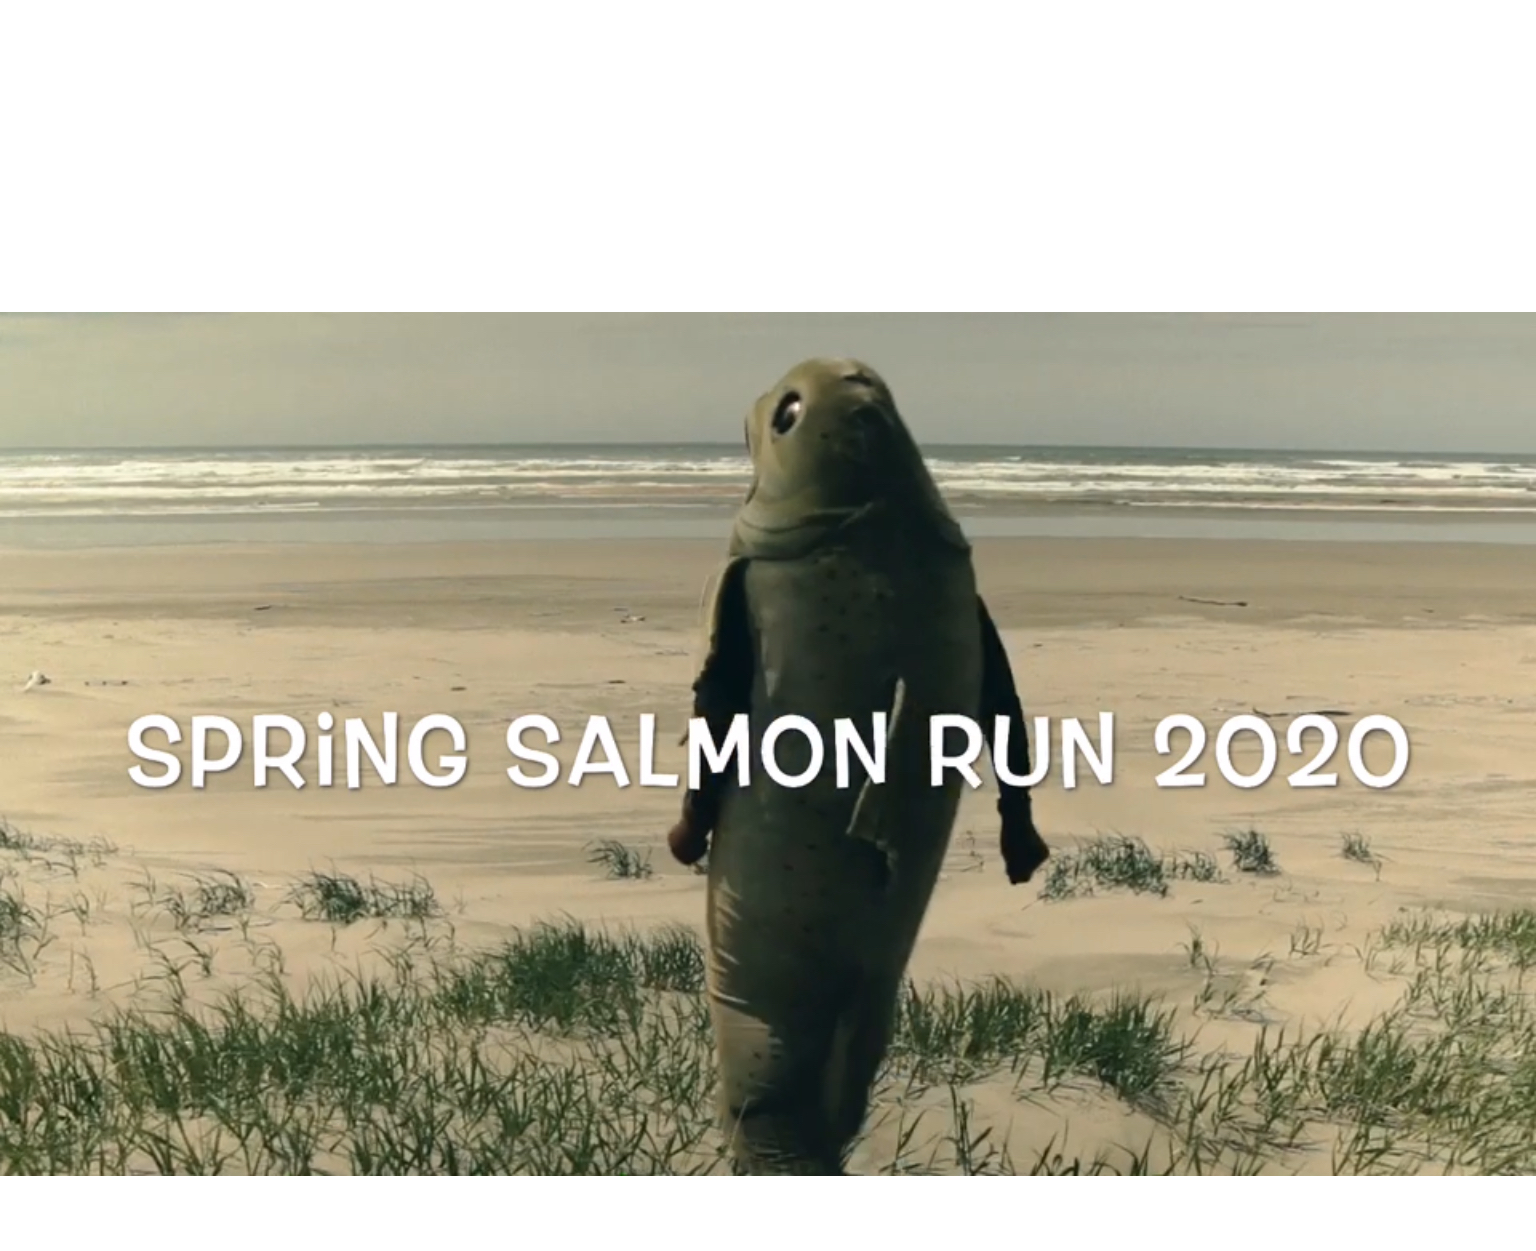 Person in Salmon costume walking across dunes to beach with words Spring Salmon Run 2020 across the middle